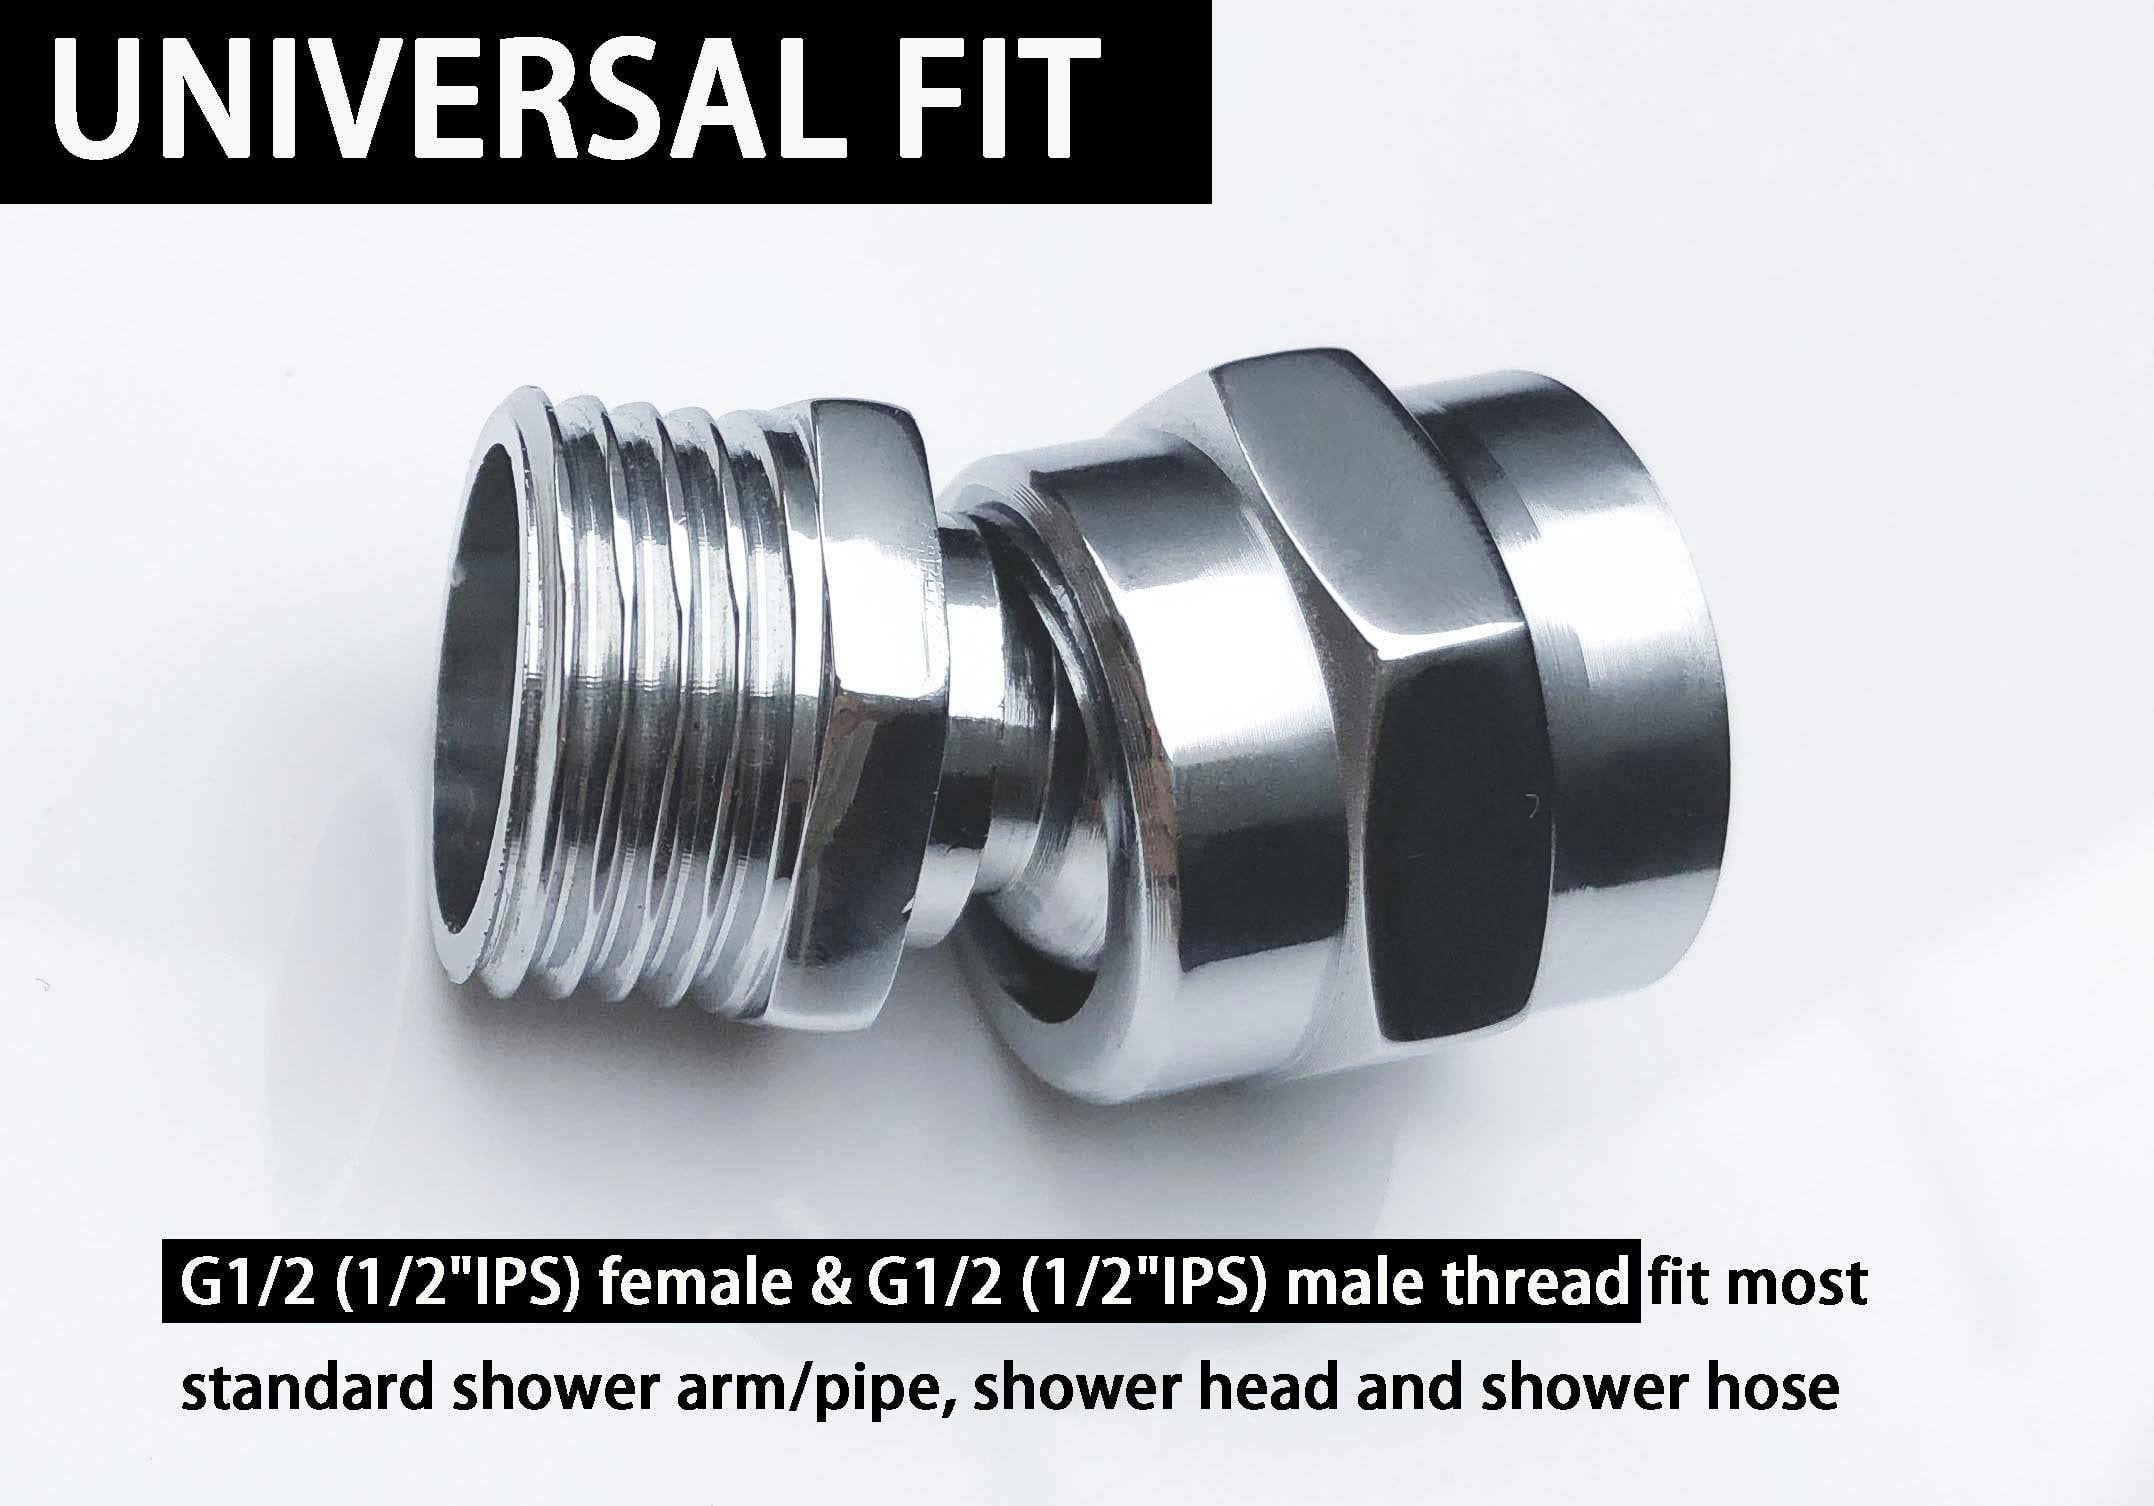 NHBETYS Shower Connector Ball Joint Shower Head Swivel Ball Adapter,showerhead Brass adjustable connector,Shower Arm Extension Universal Component，7.8 GPM large water flow 